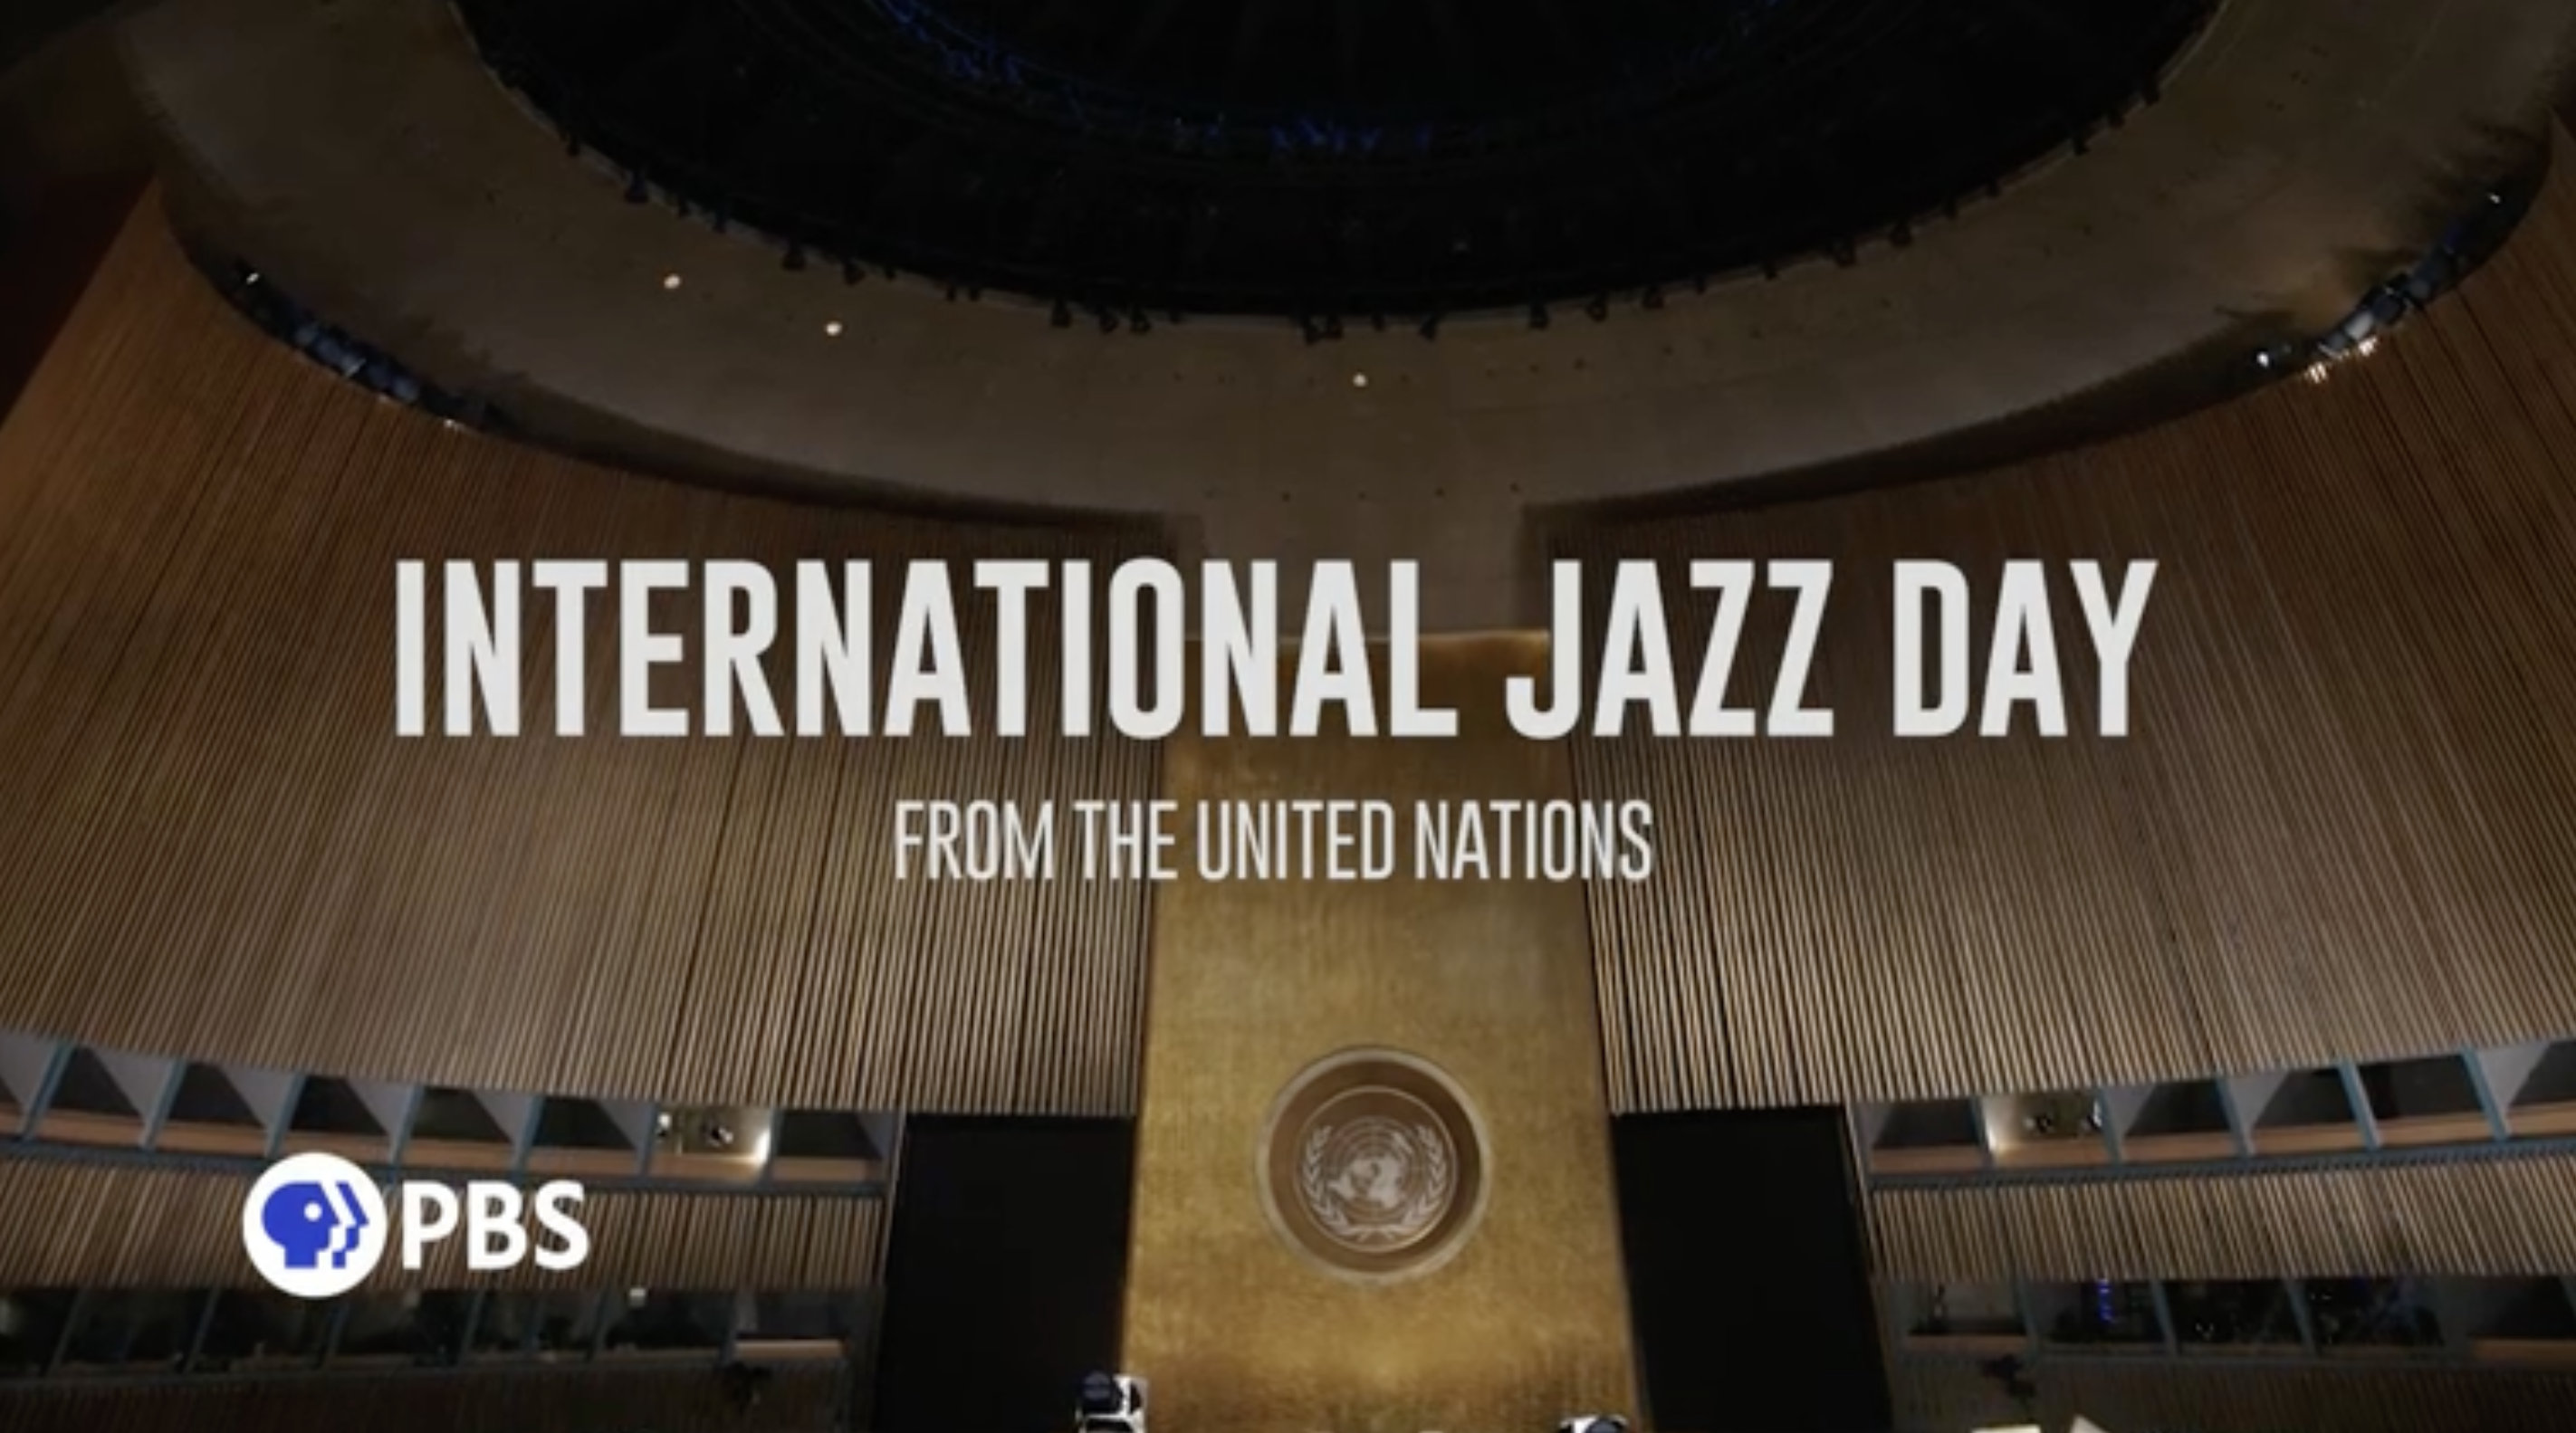 INTERNATIONAL JAZZ DAY <br/>FROM THE UNITED NATIONS